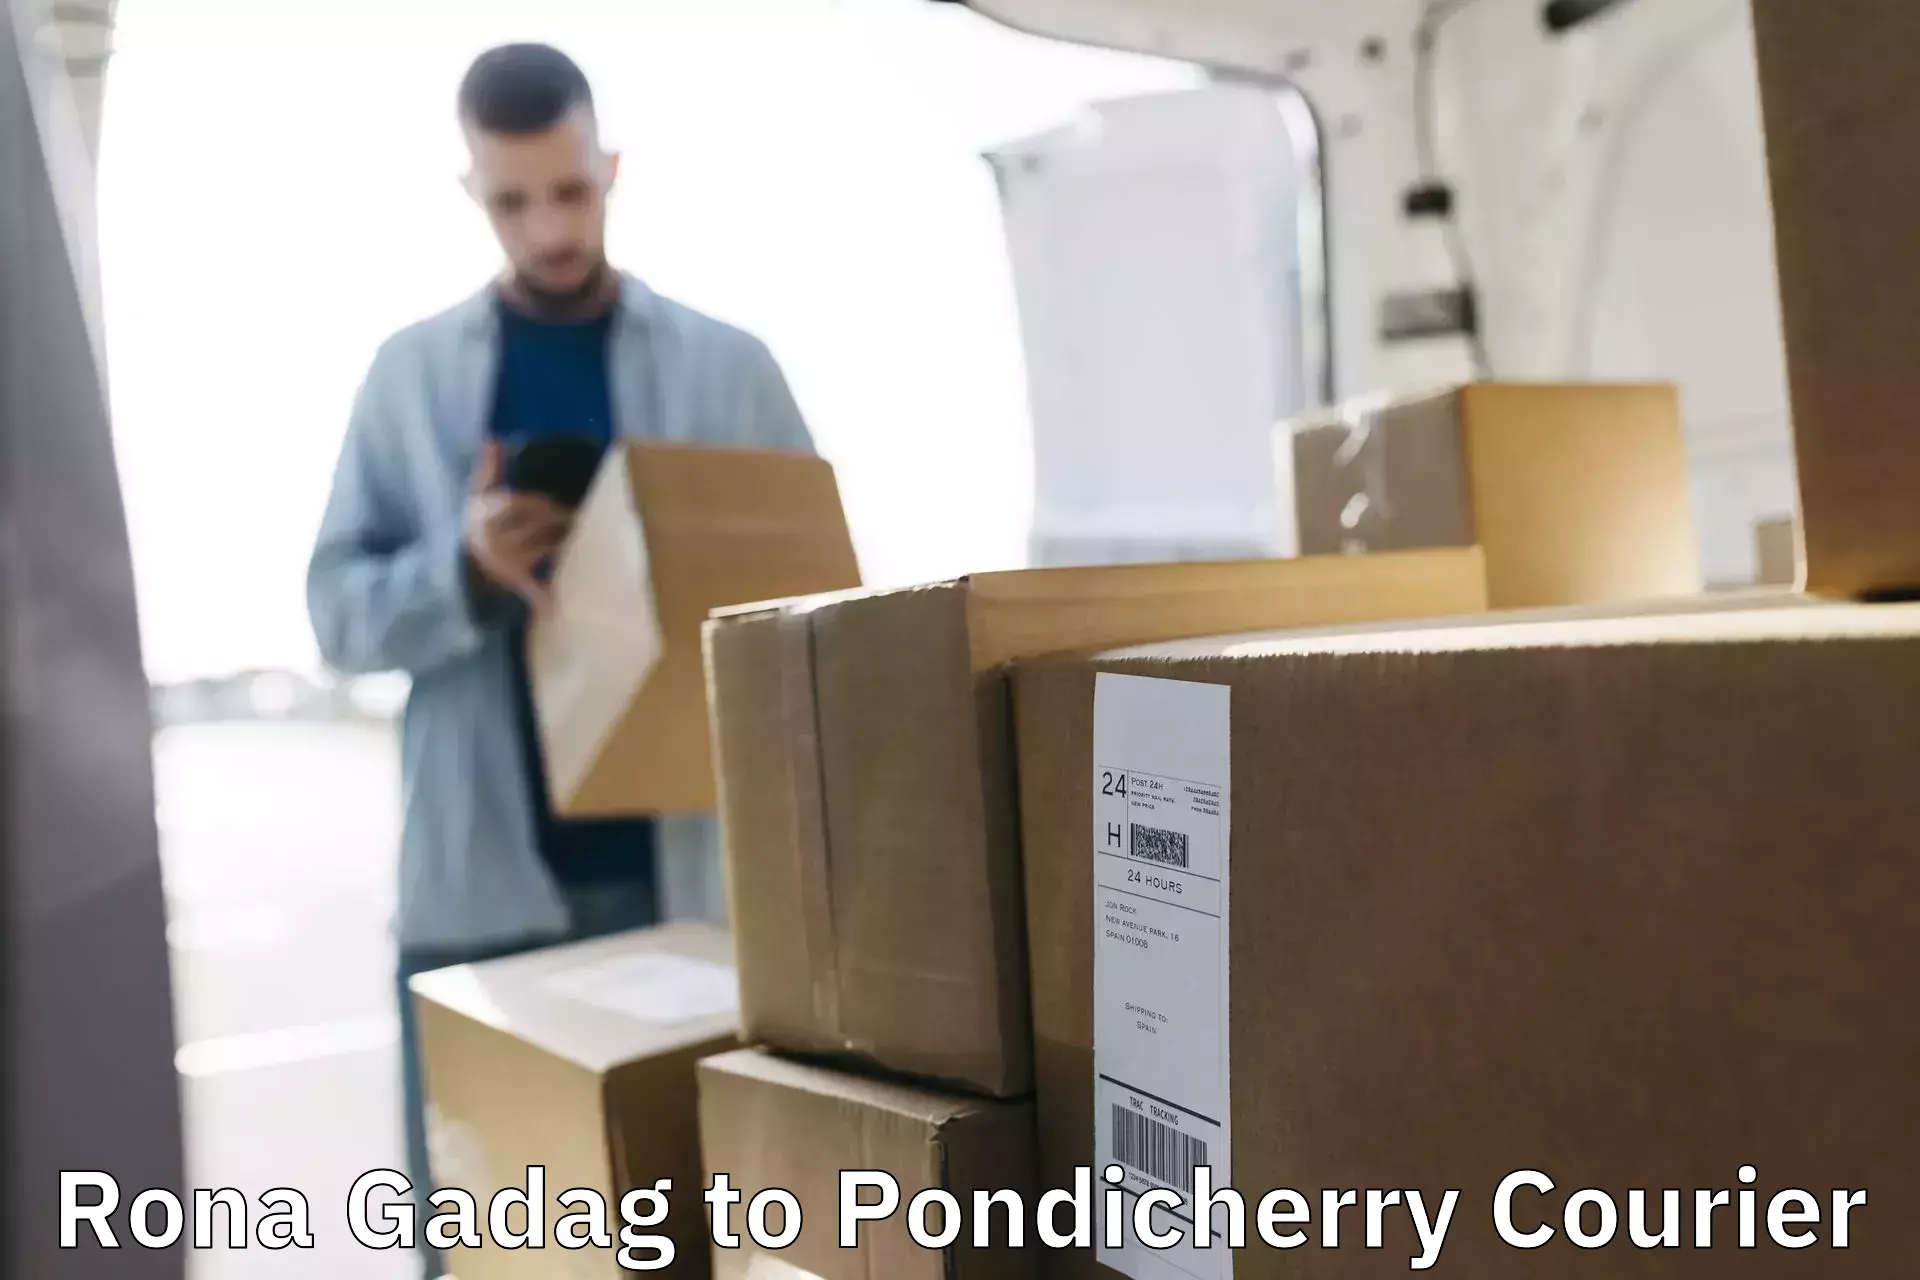 Global courier networks Rona Gadag to Pondicherry University